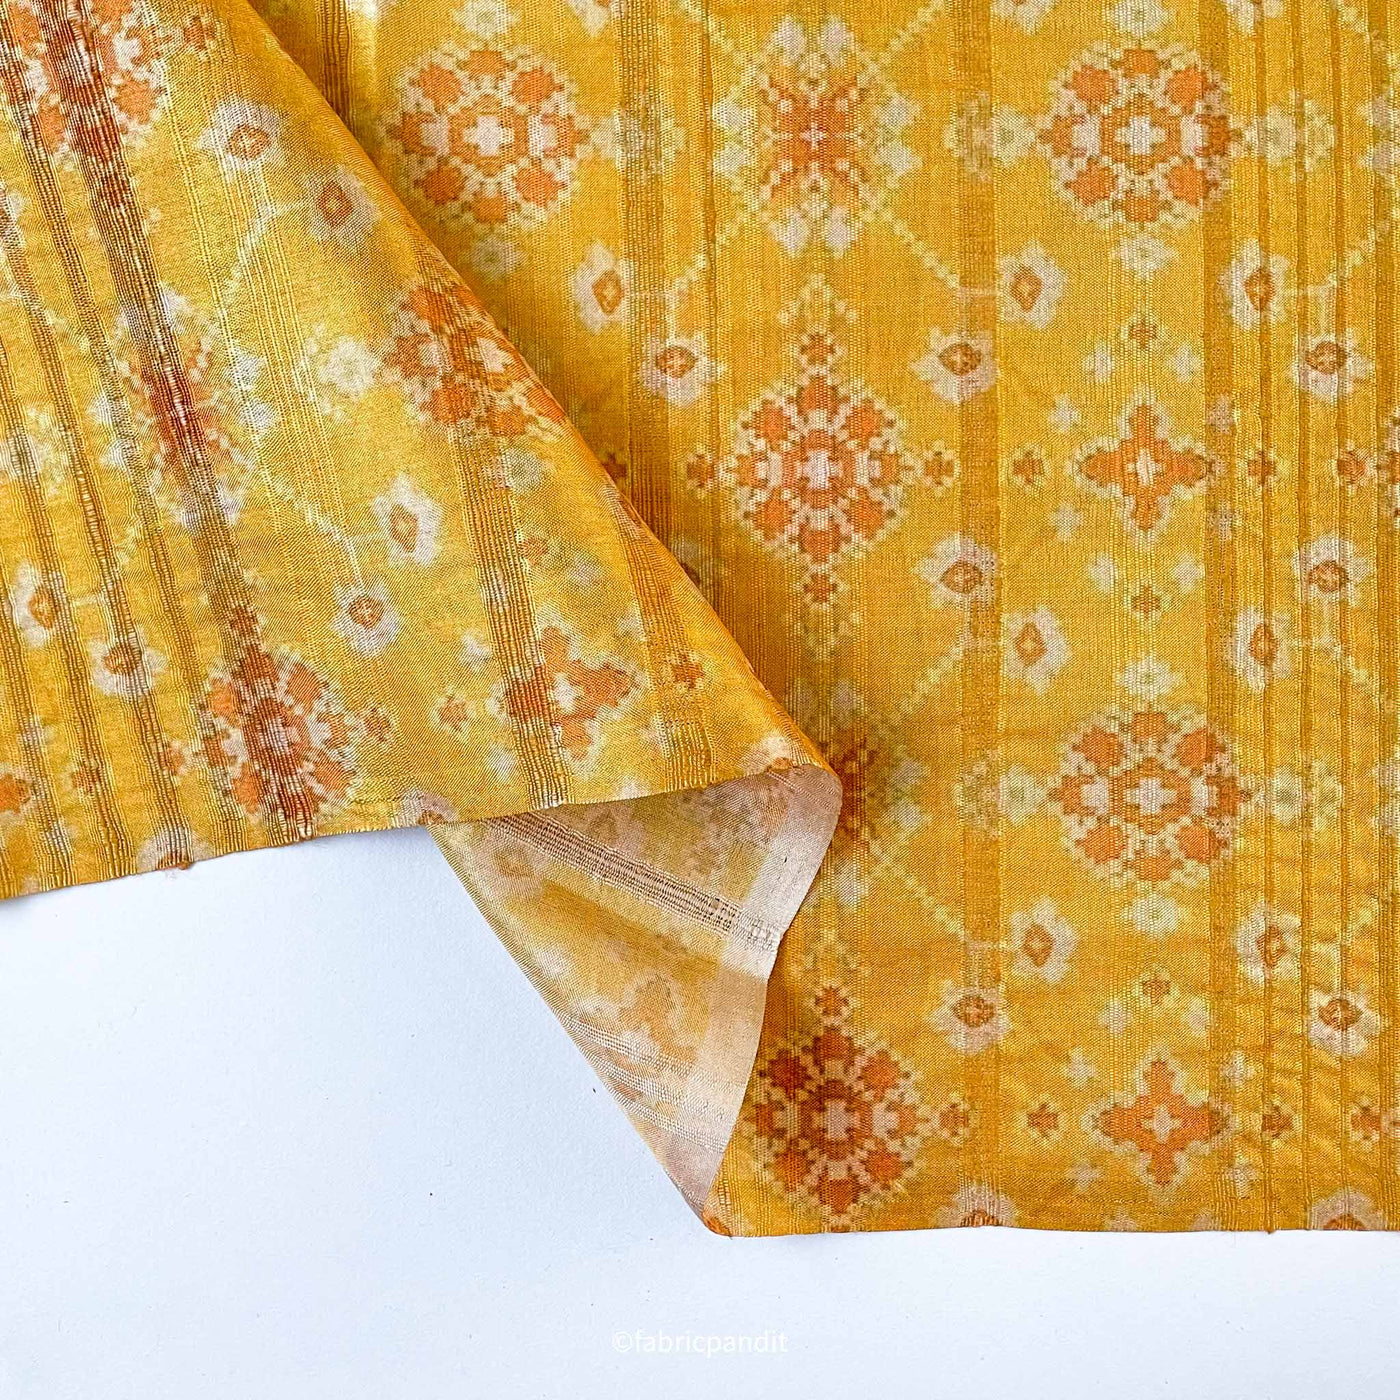 Fabric Pandit Cut Piece (CUT PIECE) Classic Yellow Abstract Patola Digital Printed Tussar Silk Fabric (Width 44 Inches)